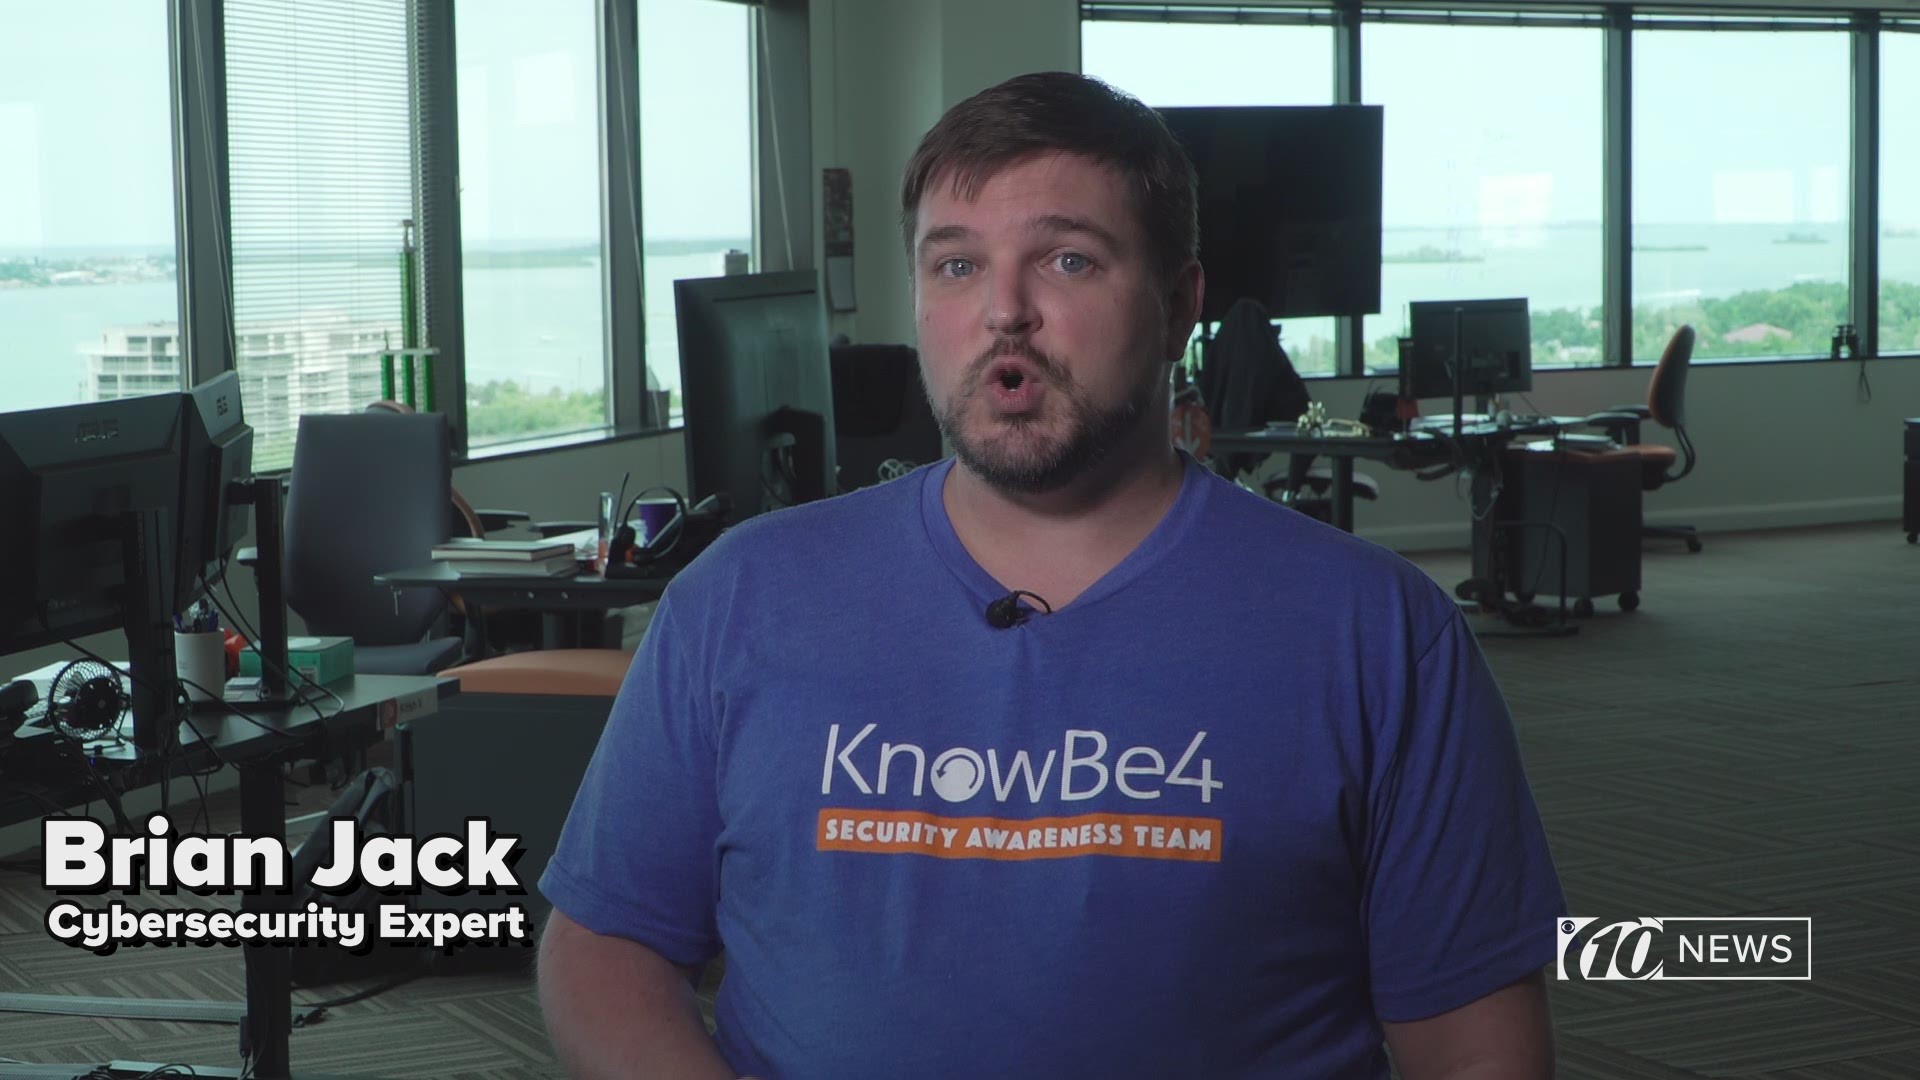 A security flaw could make millions of people vulnerable to hackers. The National Security Agency is warning people running older versions of Microsoft Windows to make sure they update their operating systems to protect themselves. Brian Jack, chief information security officer at KnowBe4, explains how to install the patch for the "BlueKeep" flaw. Patch links here: https://on.wtsp.com/2QV5n3M